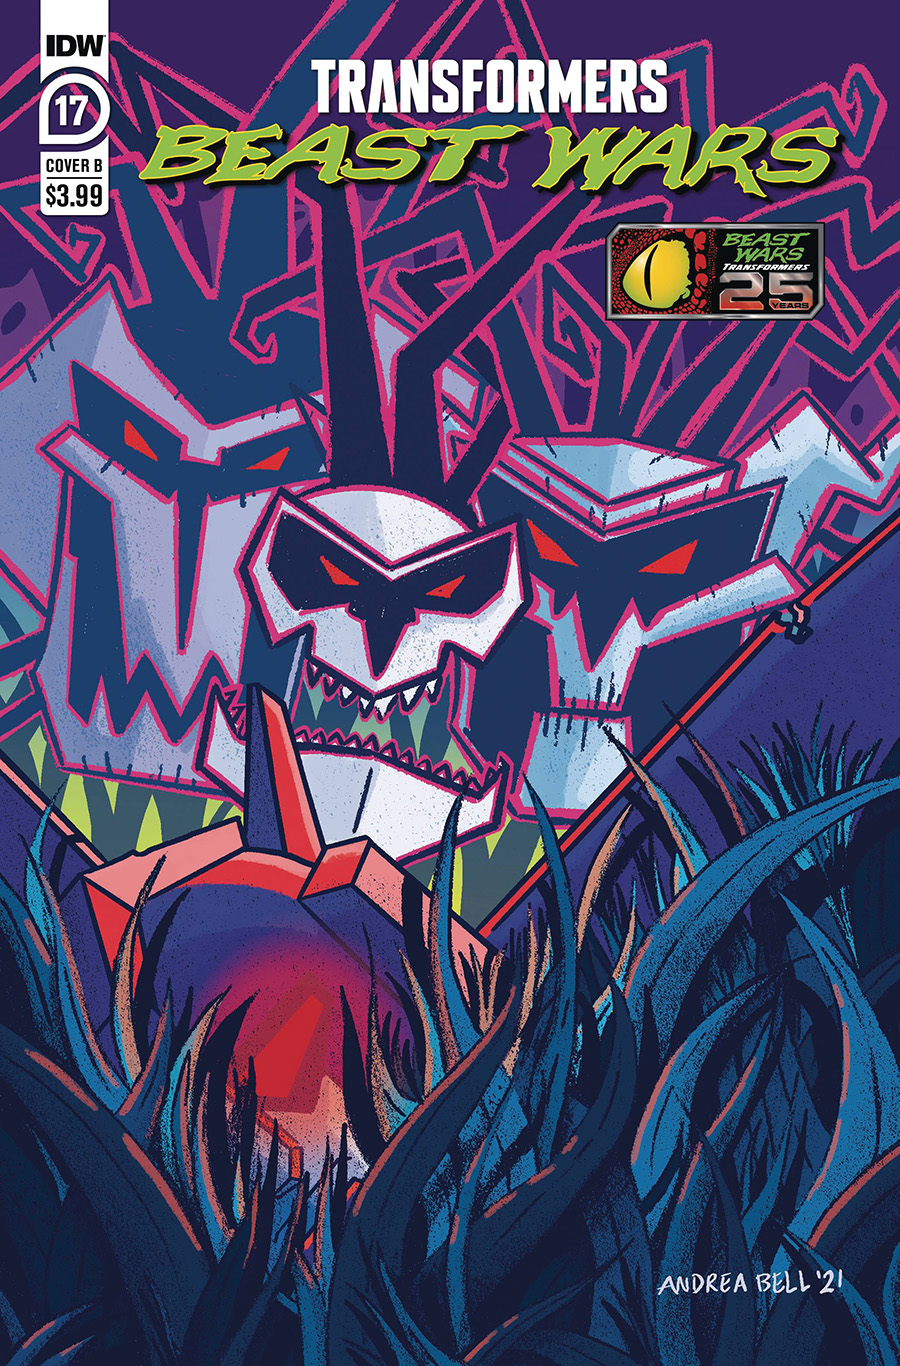 Transformers Beast Wars Vol 2 #17 Cover B Variant Andrea Bell Cover